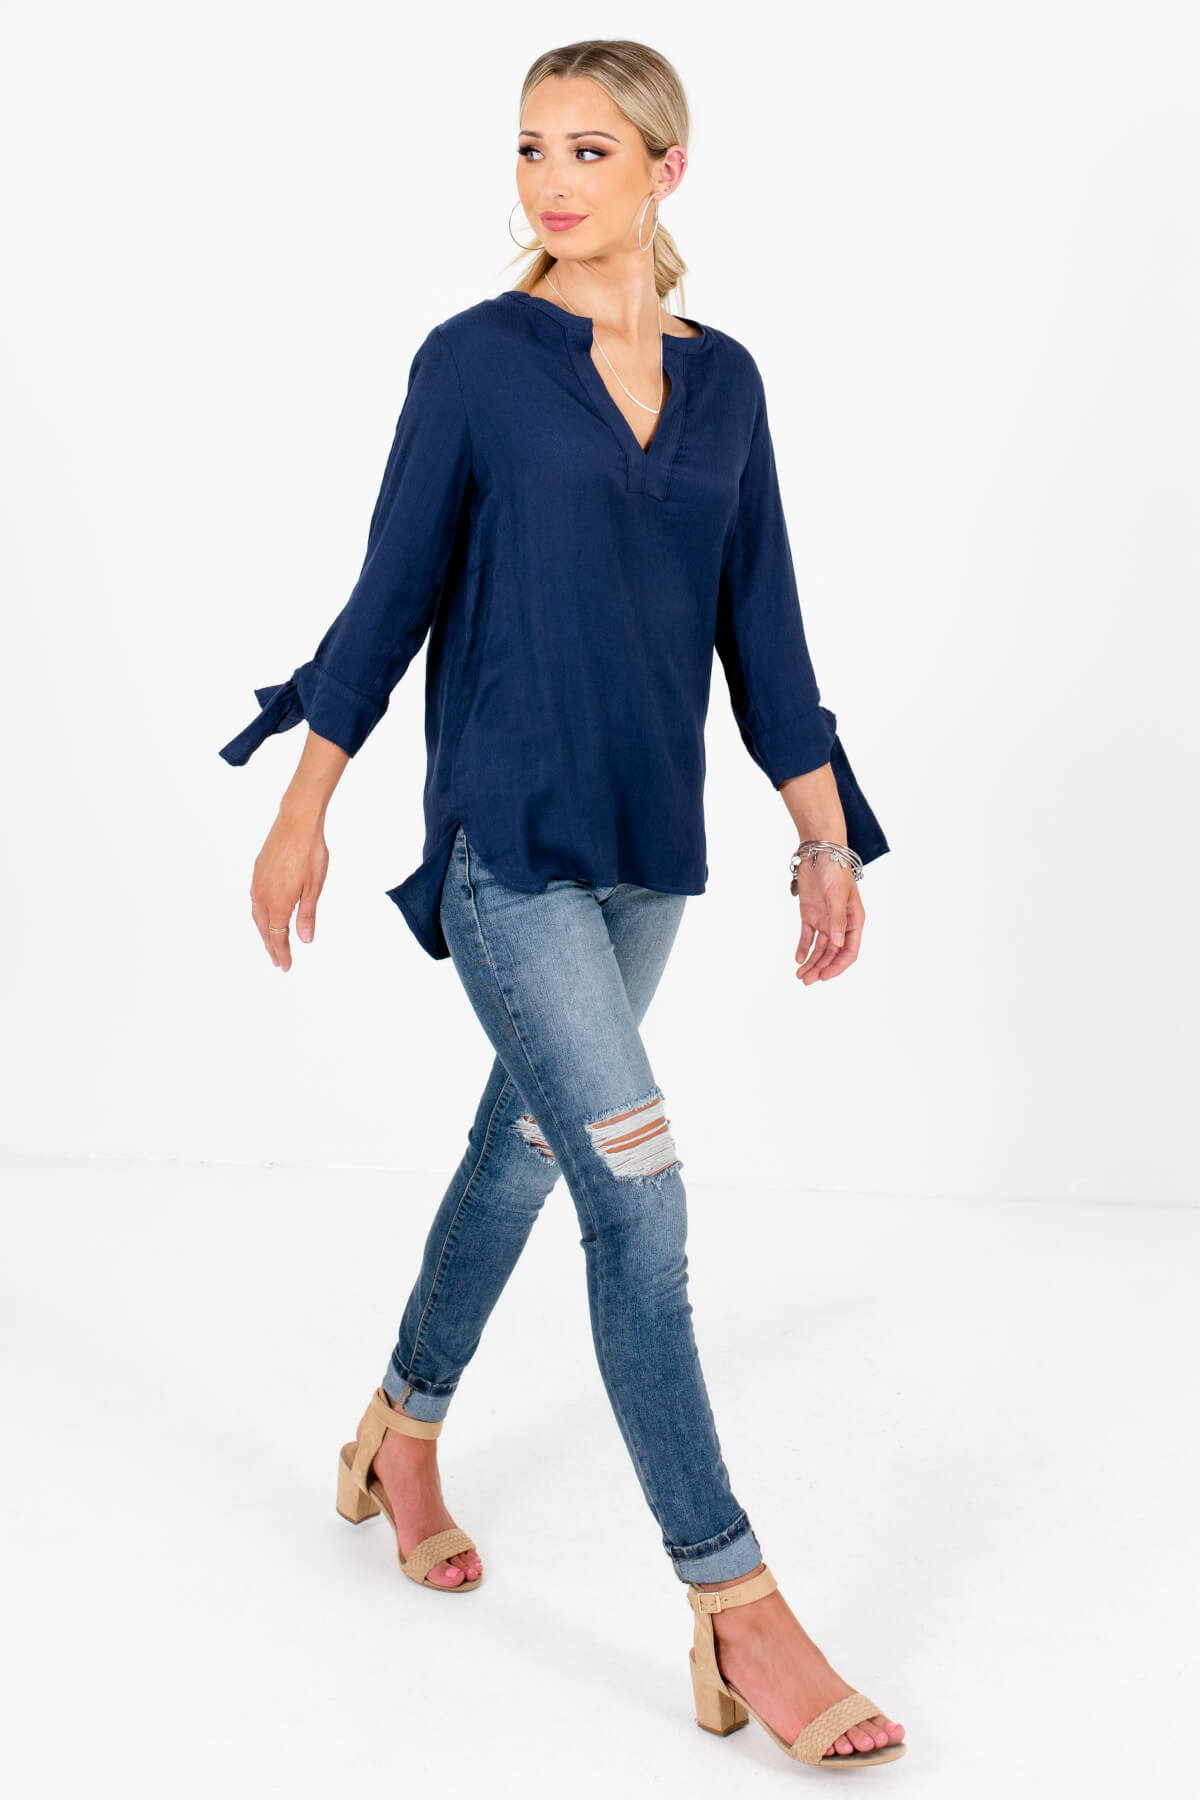 Navy Blue Cute and Comfortable Boutique Blouses for Women